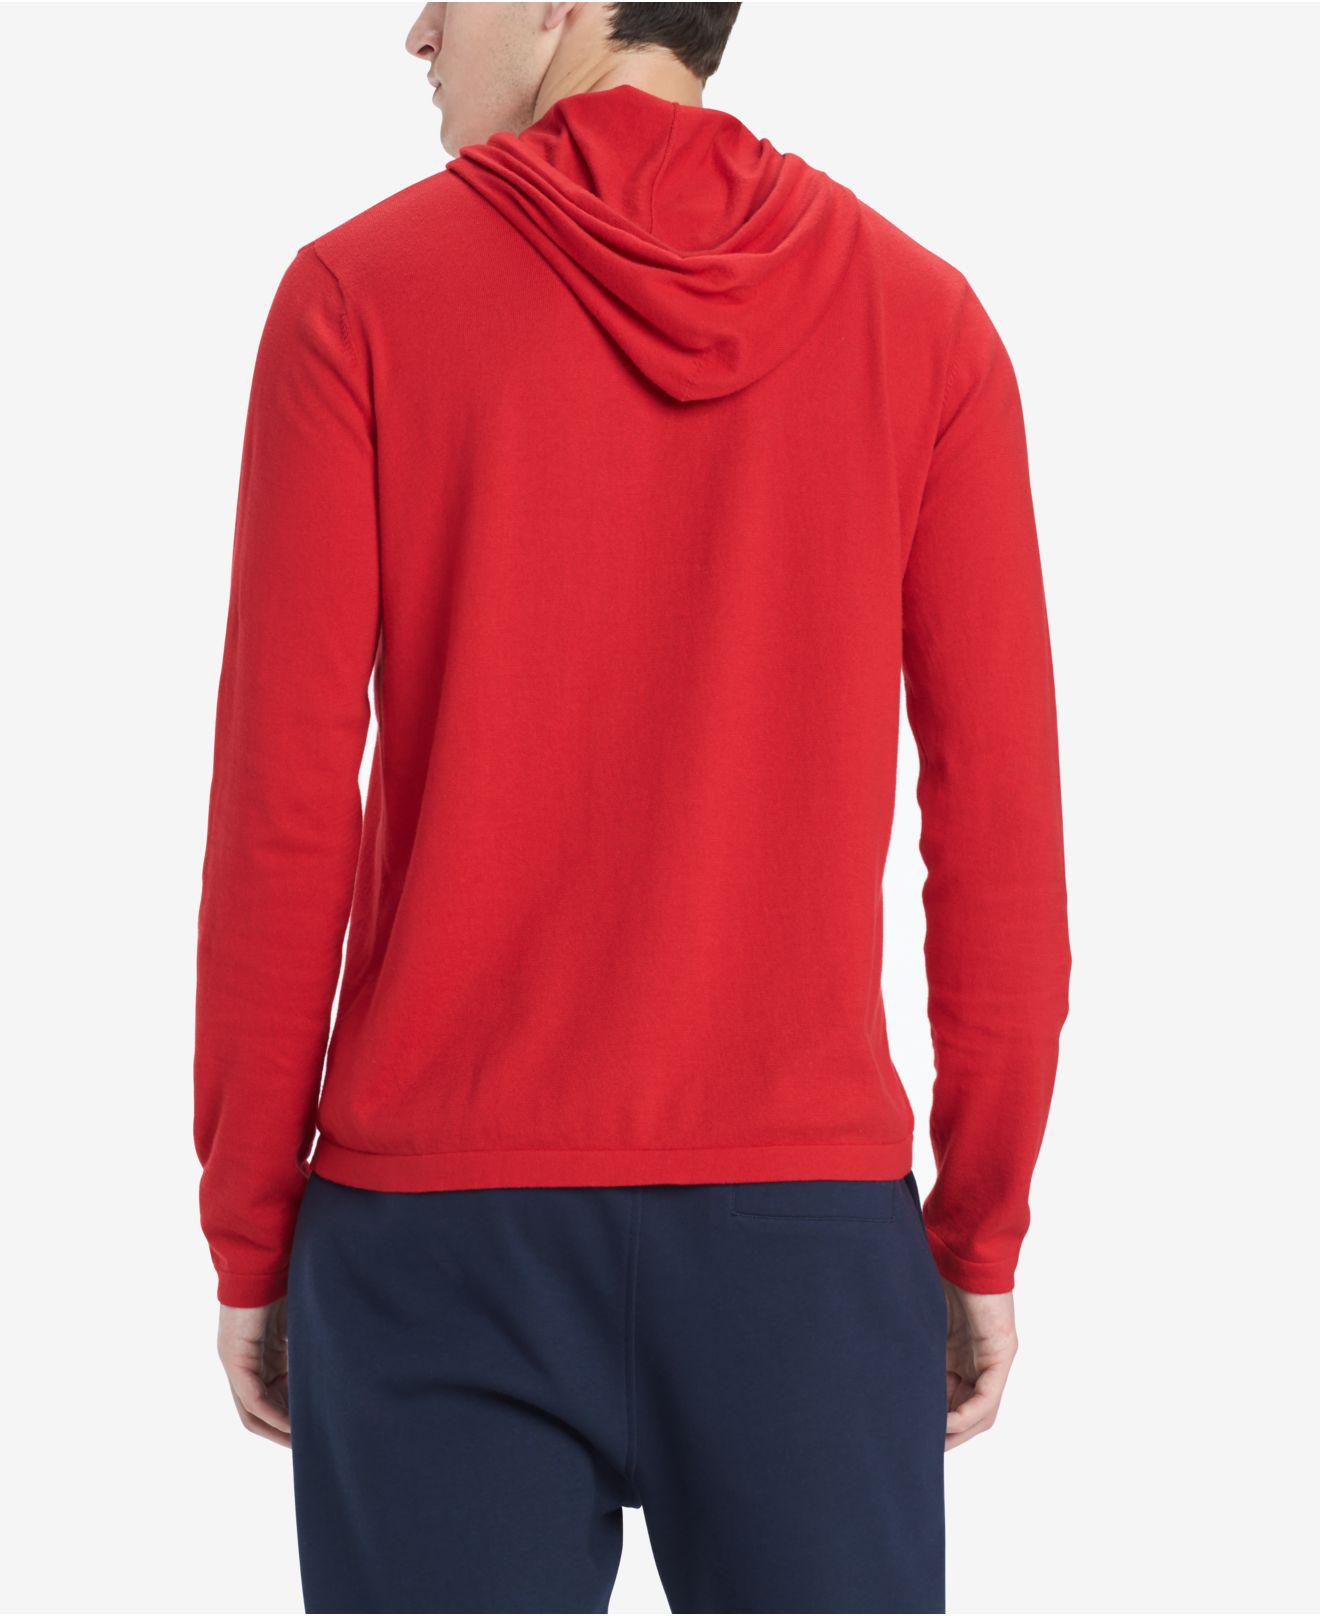 Lyst - Tommy Hilfiger Signature Hoodie, Created For Macy's in Red for Men